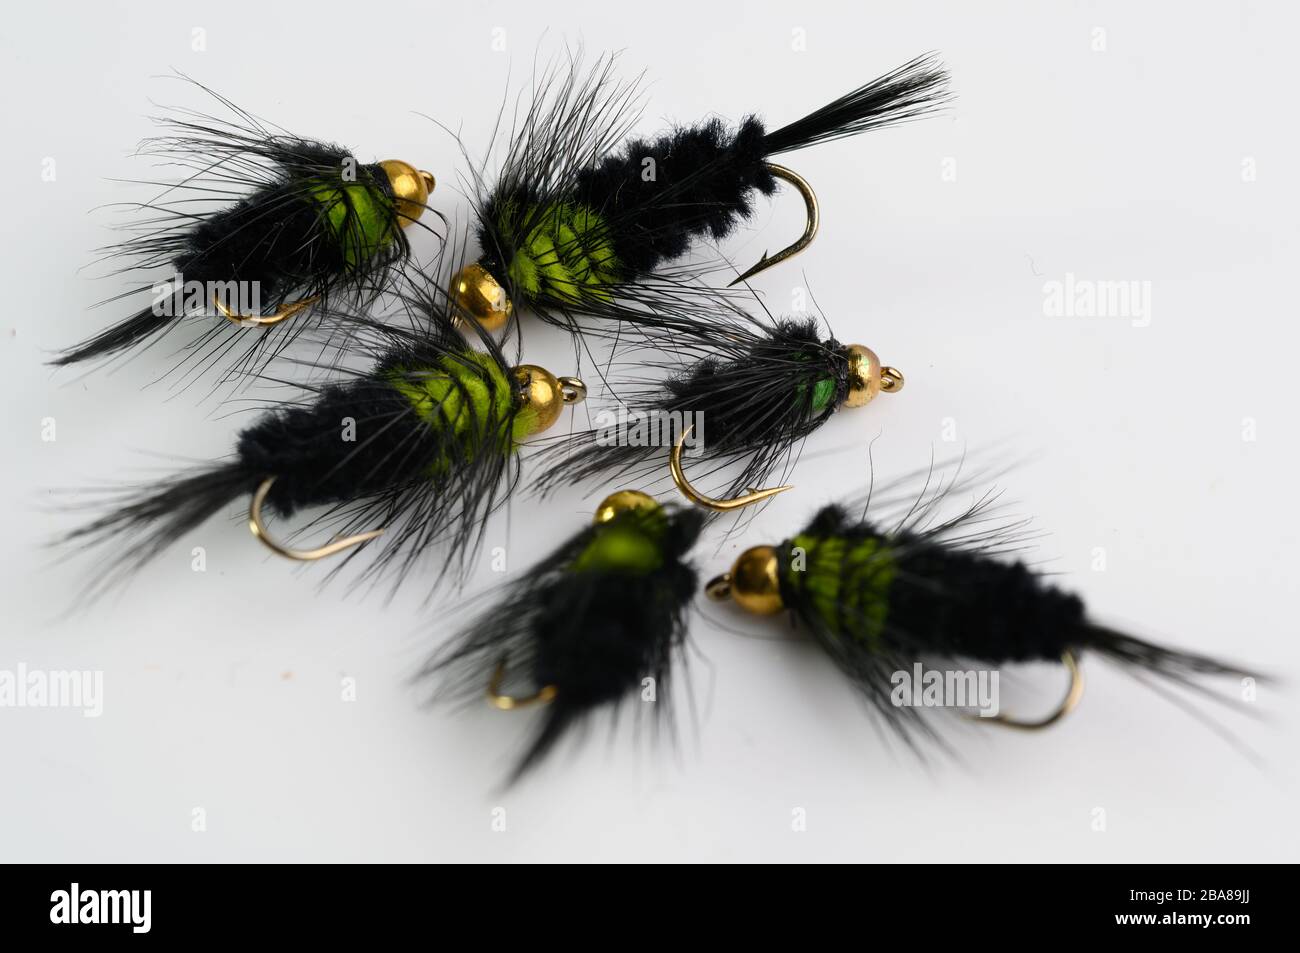 Goldhead Stonefly Trout Flies 6 x Golden Stonefly Choice of sizes Fishing Flies